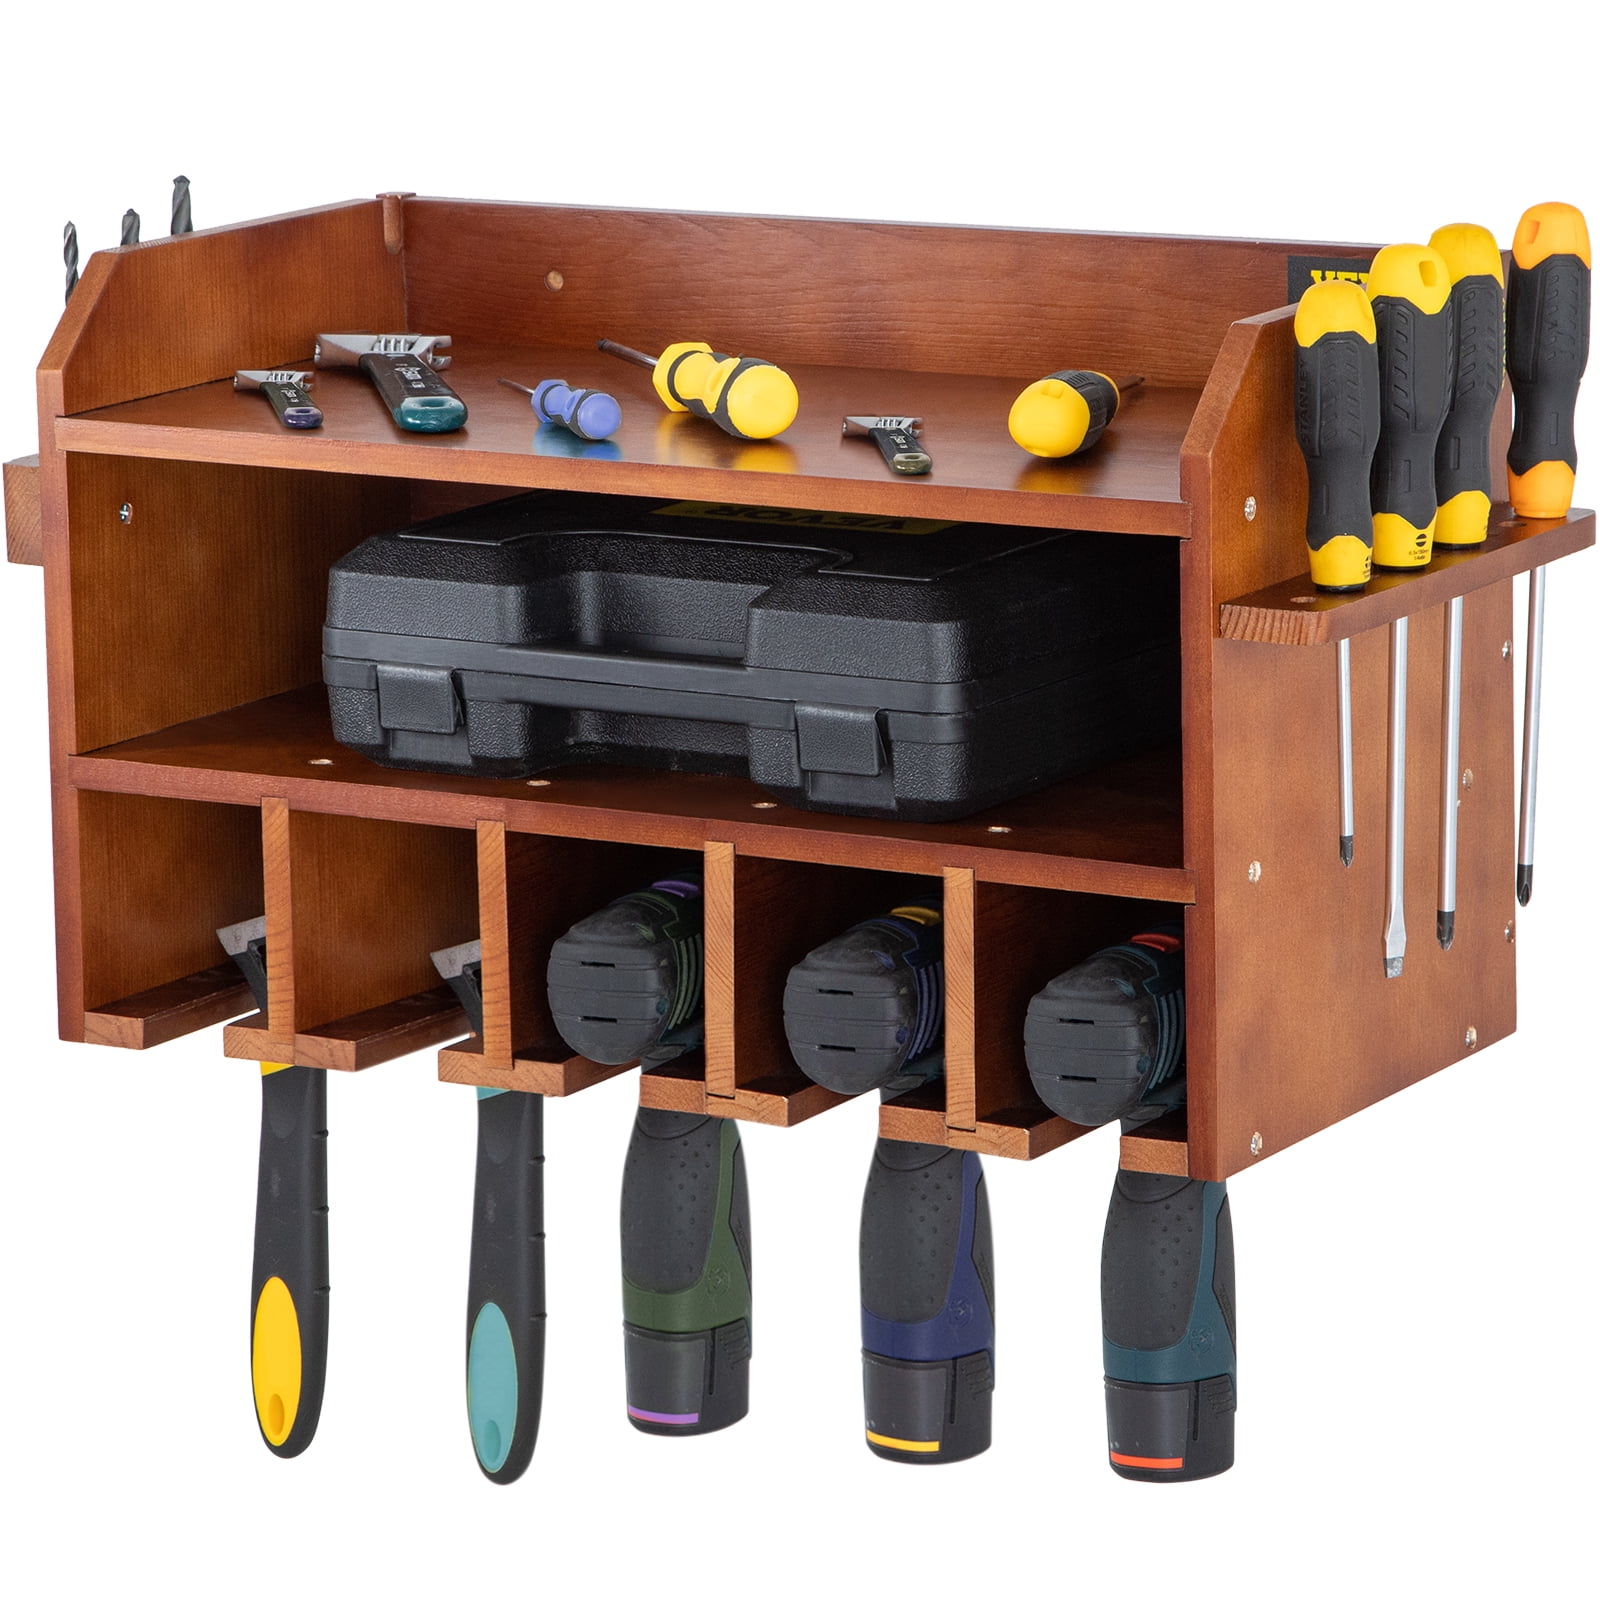 Thousands of Shoppers Are Buying This 'Handy' Cabinet Organizer at